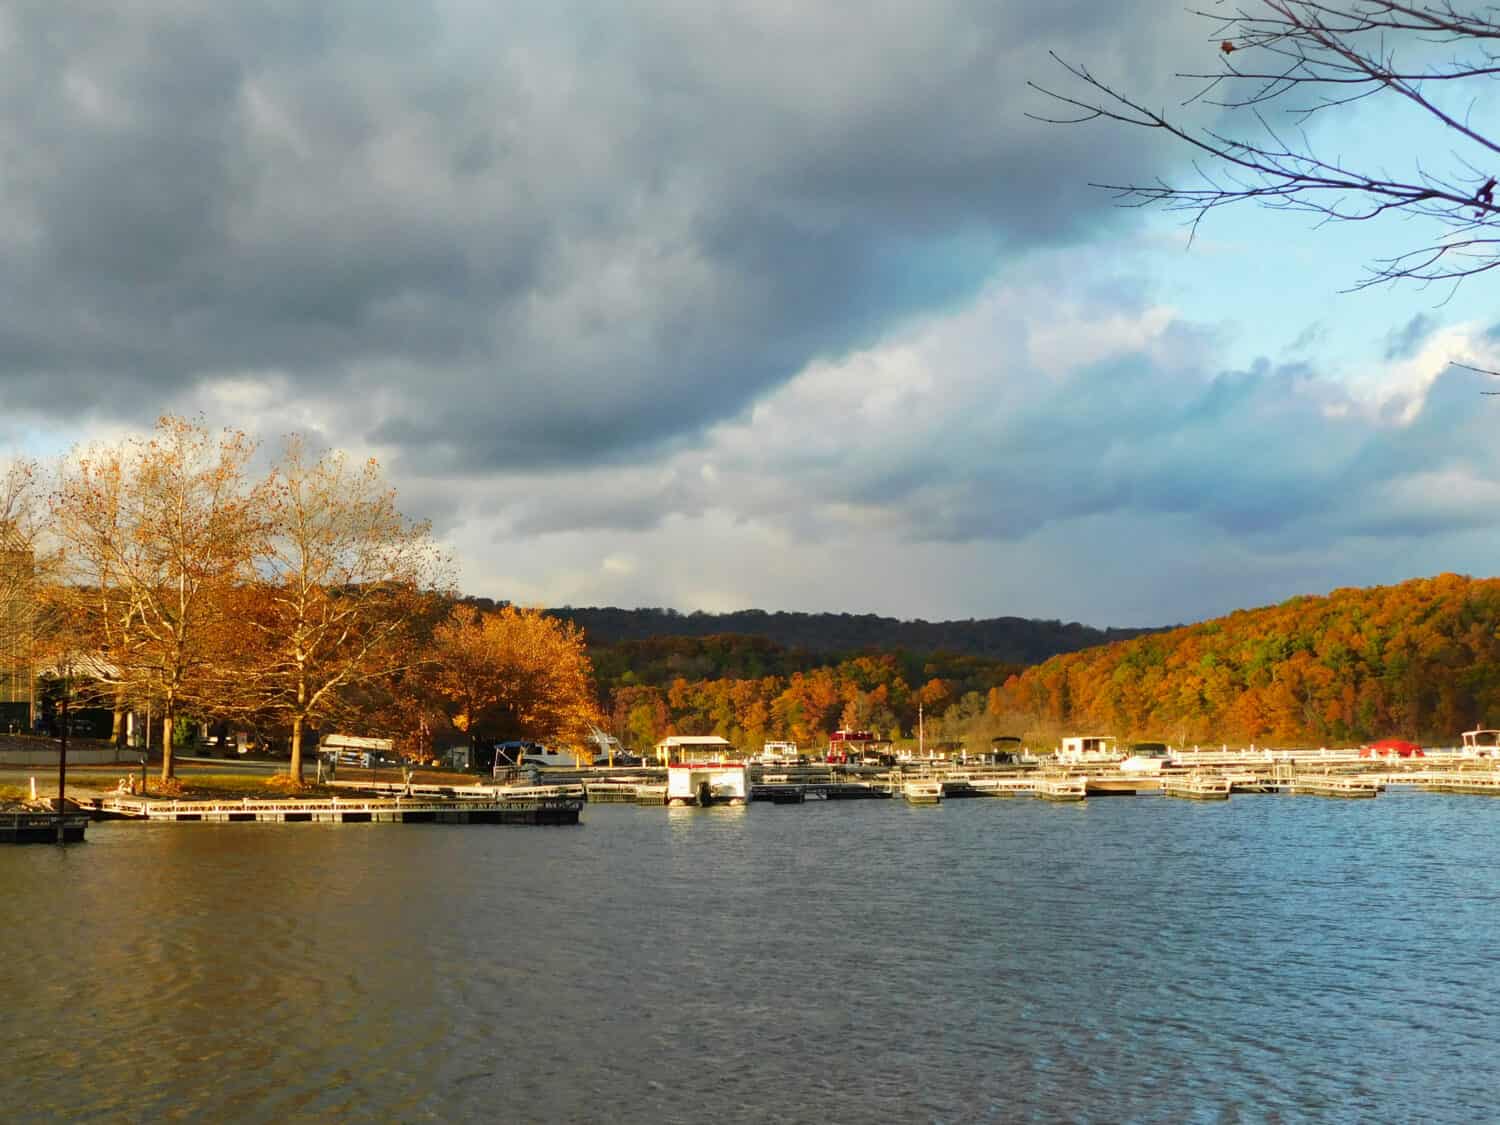 Lake view of boat marina in autumn. Image taken at Seven Springs, Raystown Lake Region, Pennsylvania. The Appalachian Mountains are seen in the background.